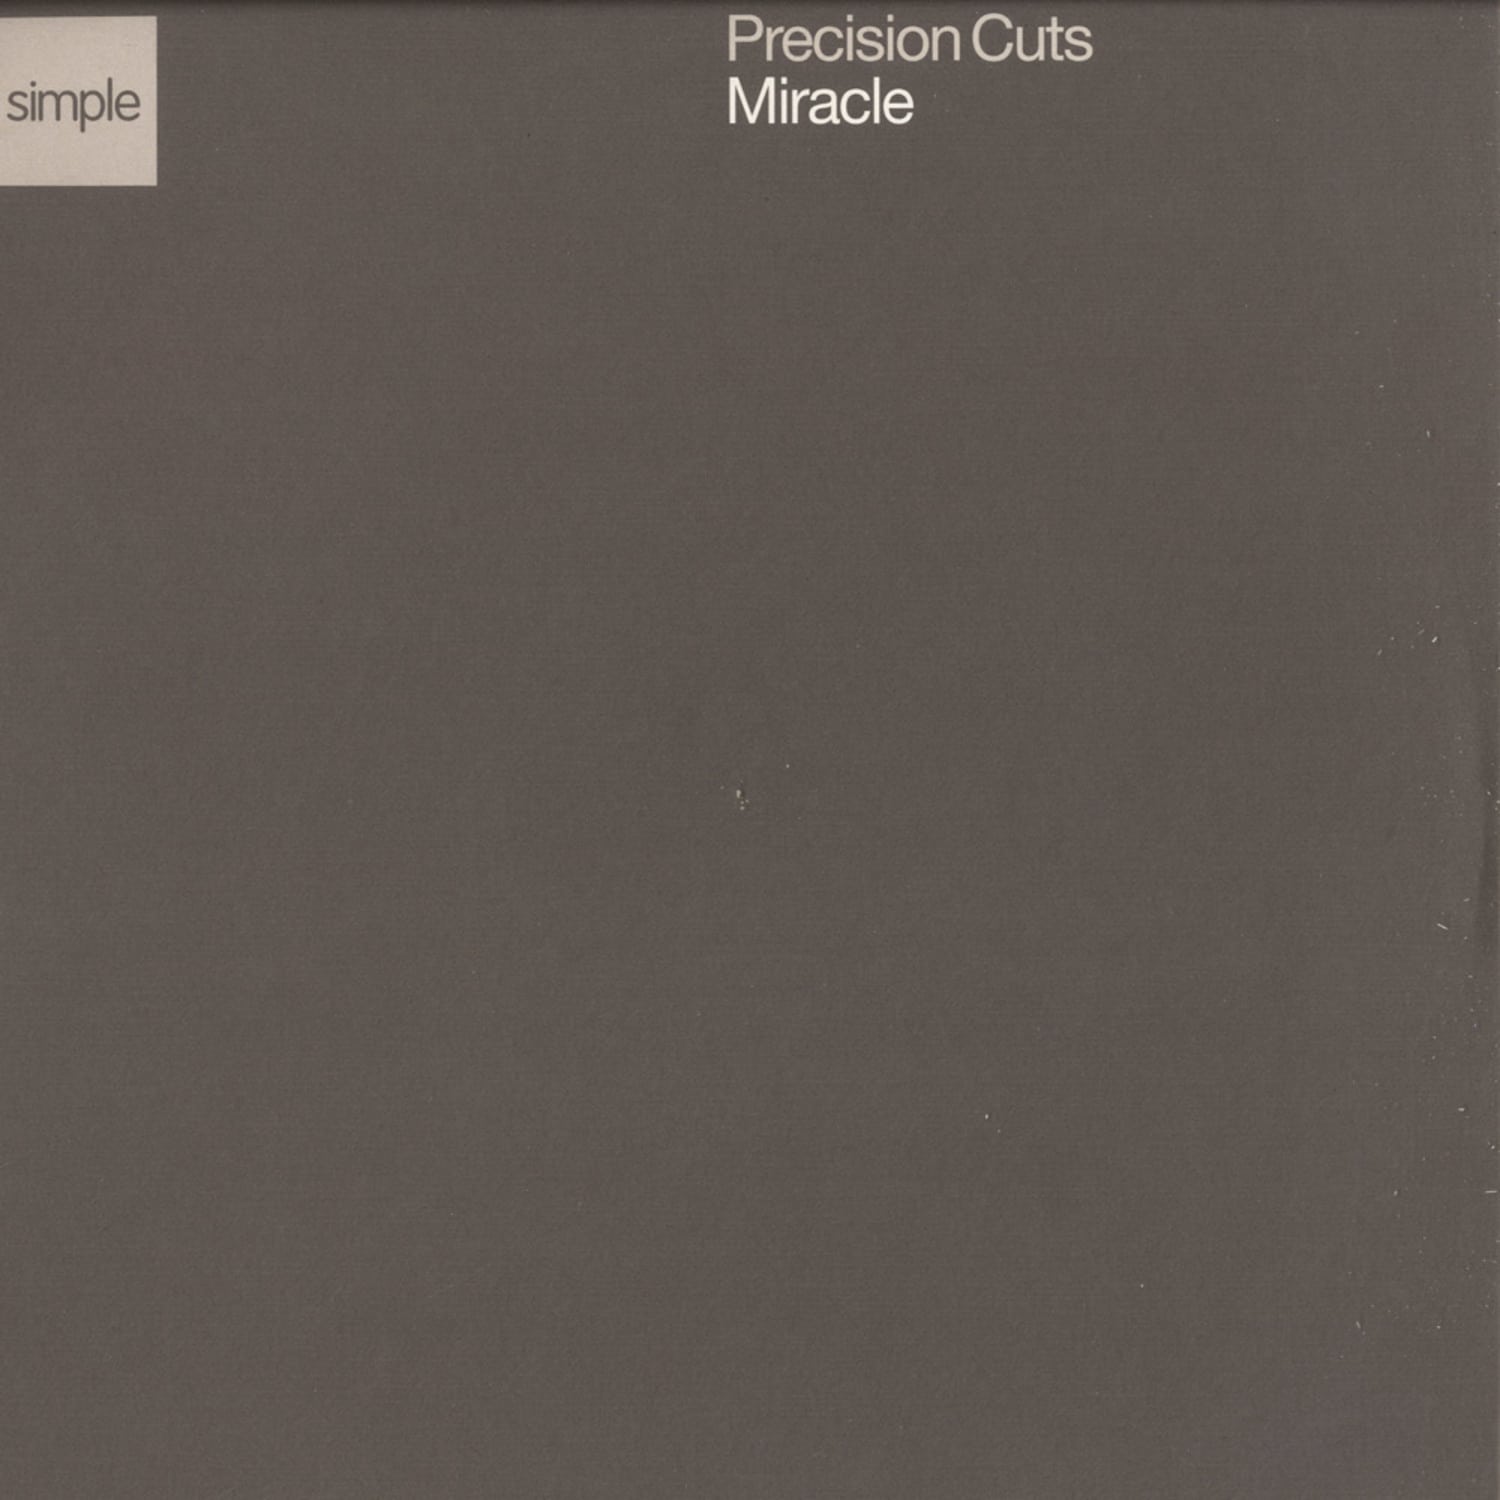 Precision Cuts - MIRACLE